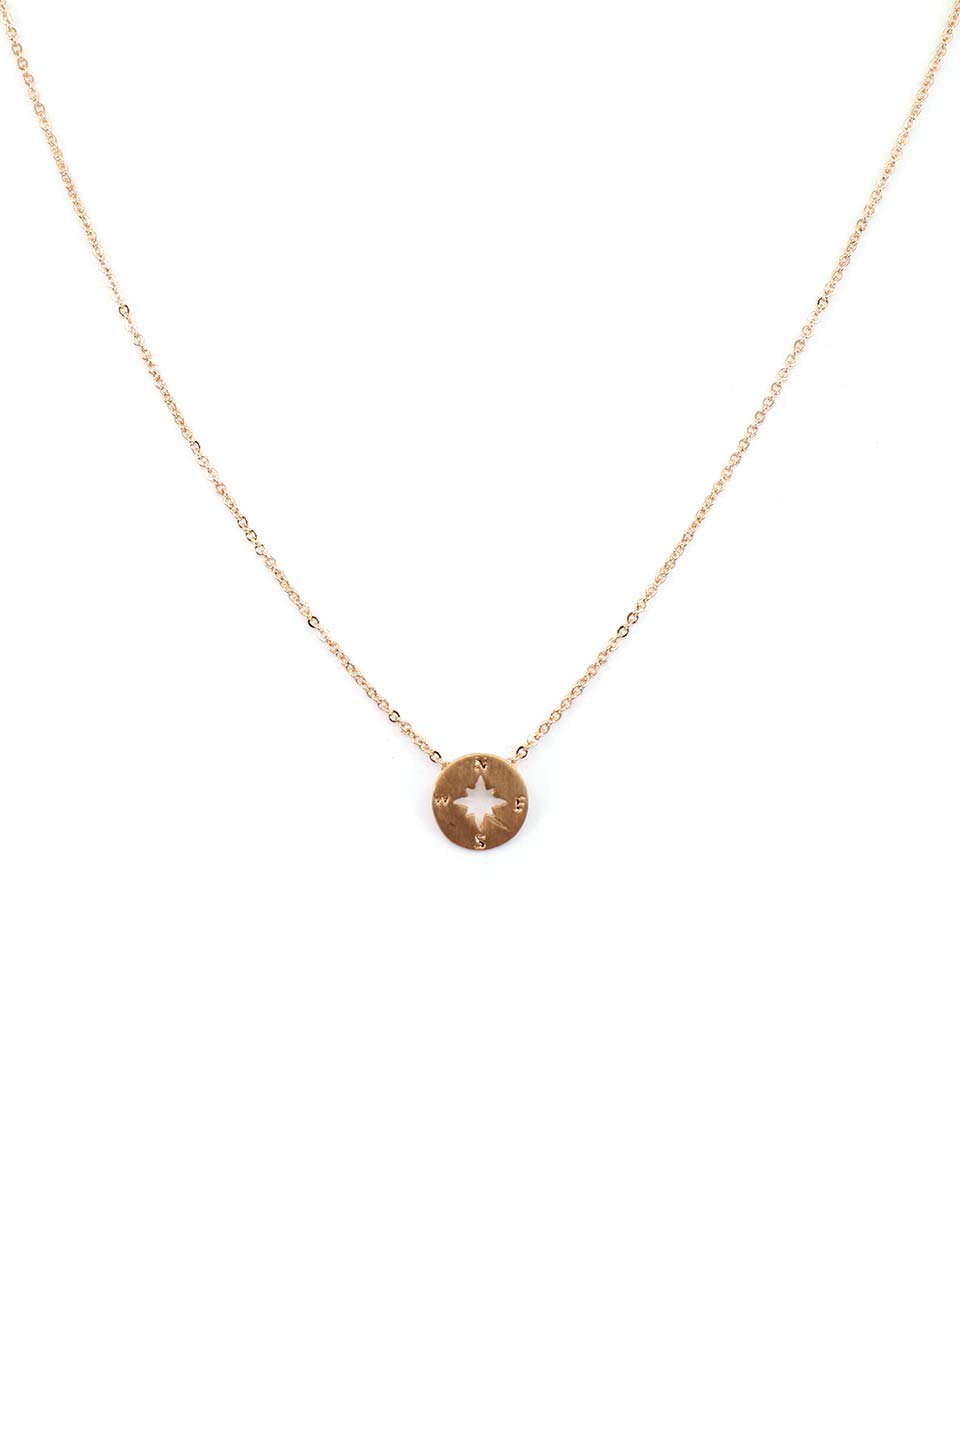 Compass Charm Necklace コンパスチャーム・ネックレス / from